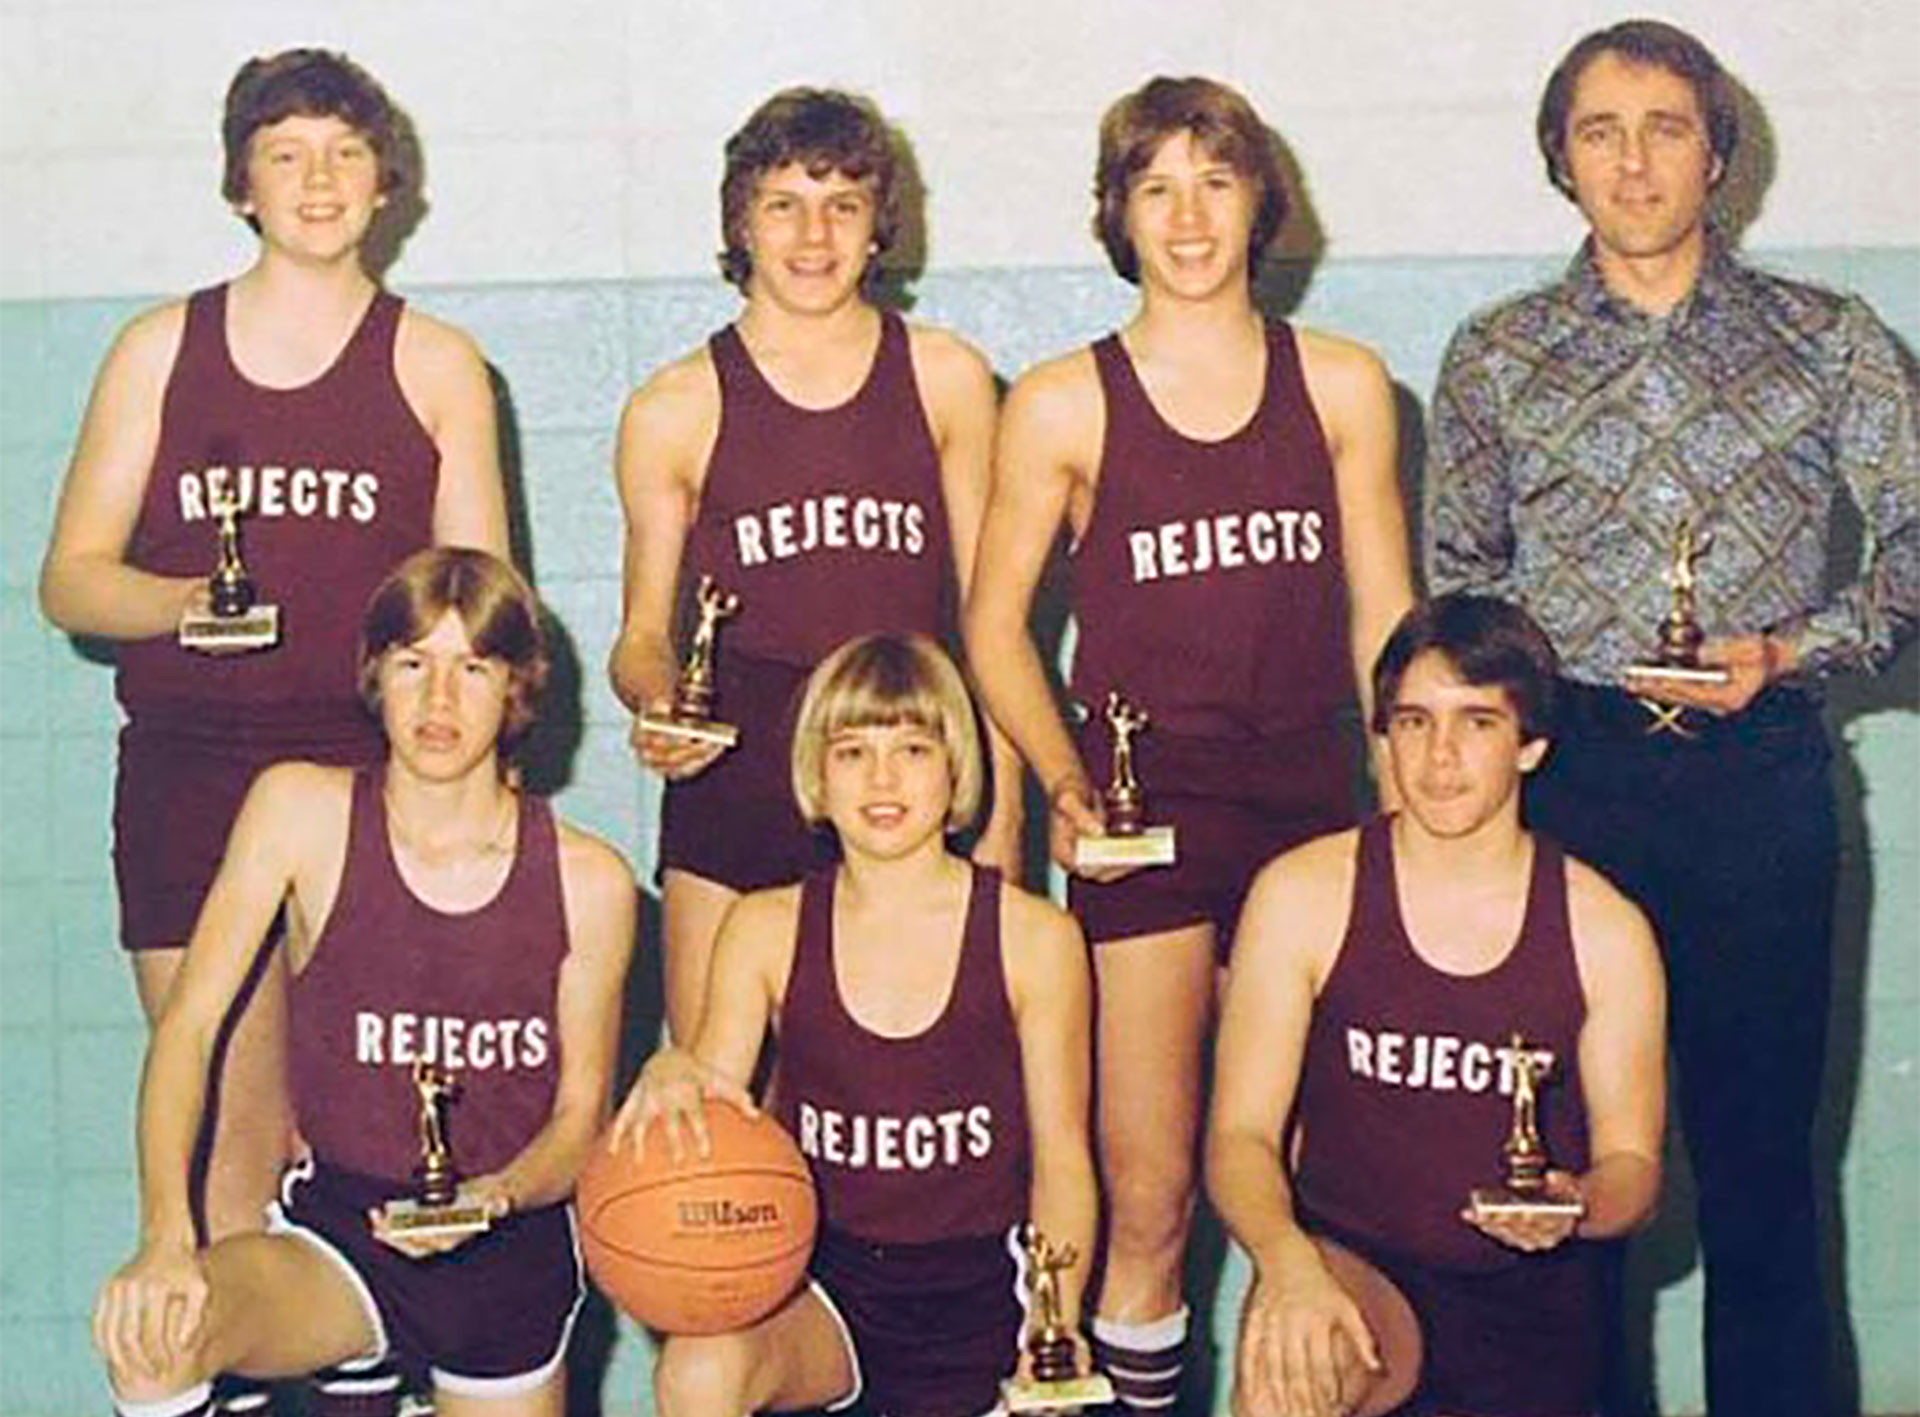 The Cherokee Rejects, a team created by Brad Pitt (bottom center) when he was in school